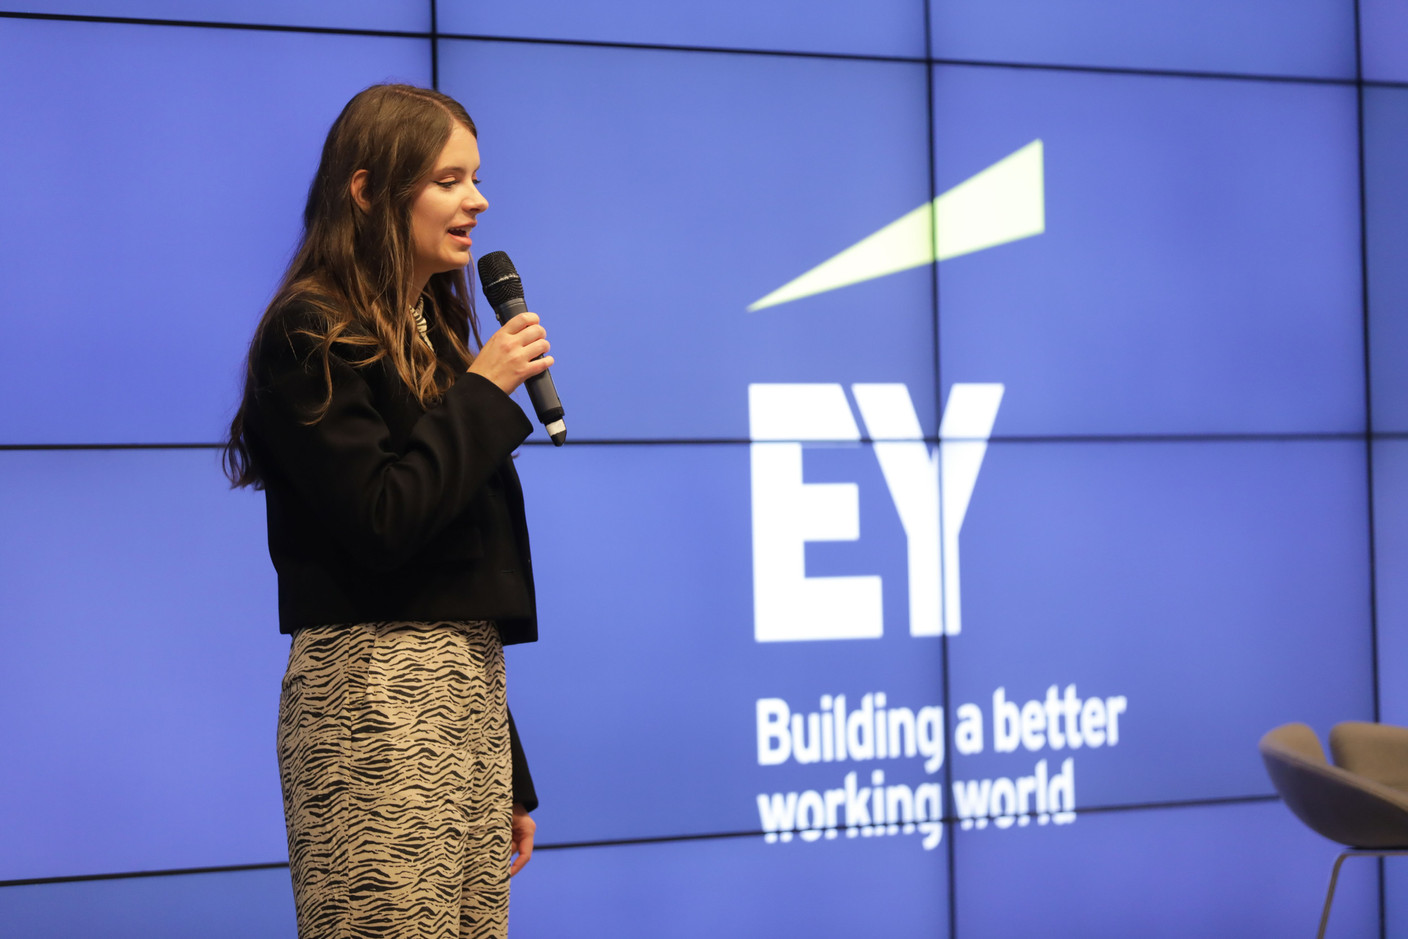 A total of 350 new joiners were welcomed to EY on 16 September. (Photo: Luc Deflorenne)